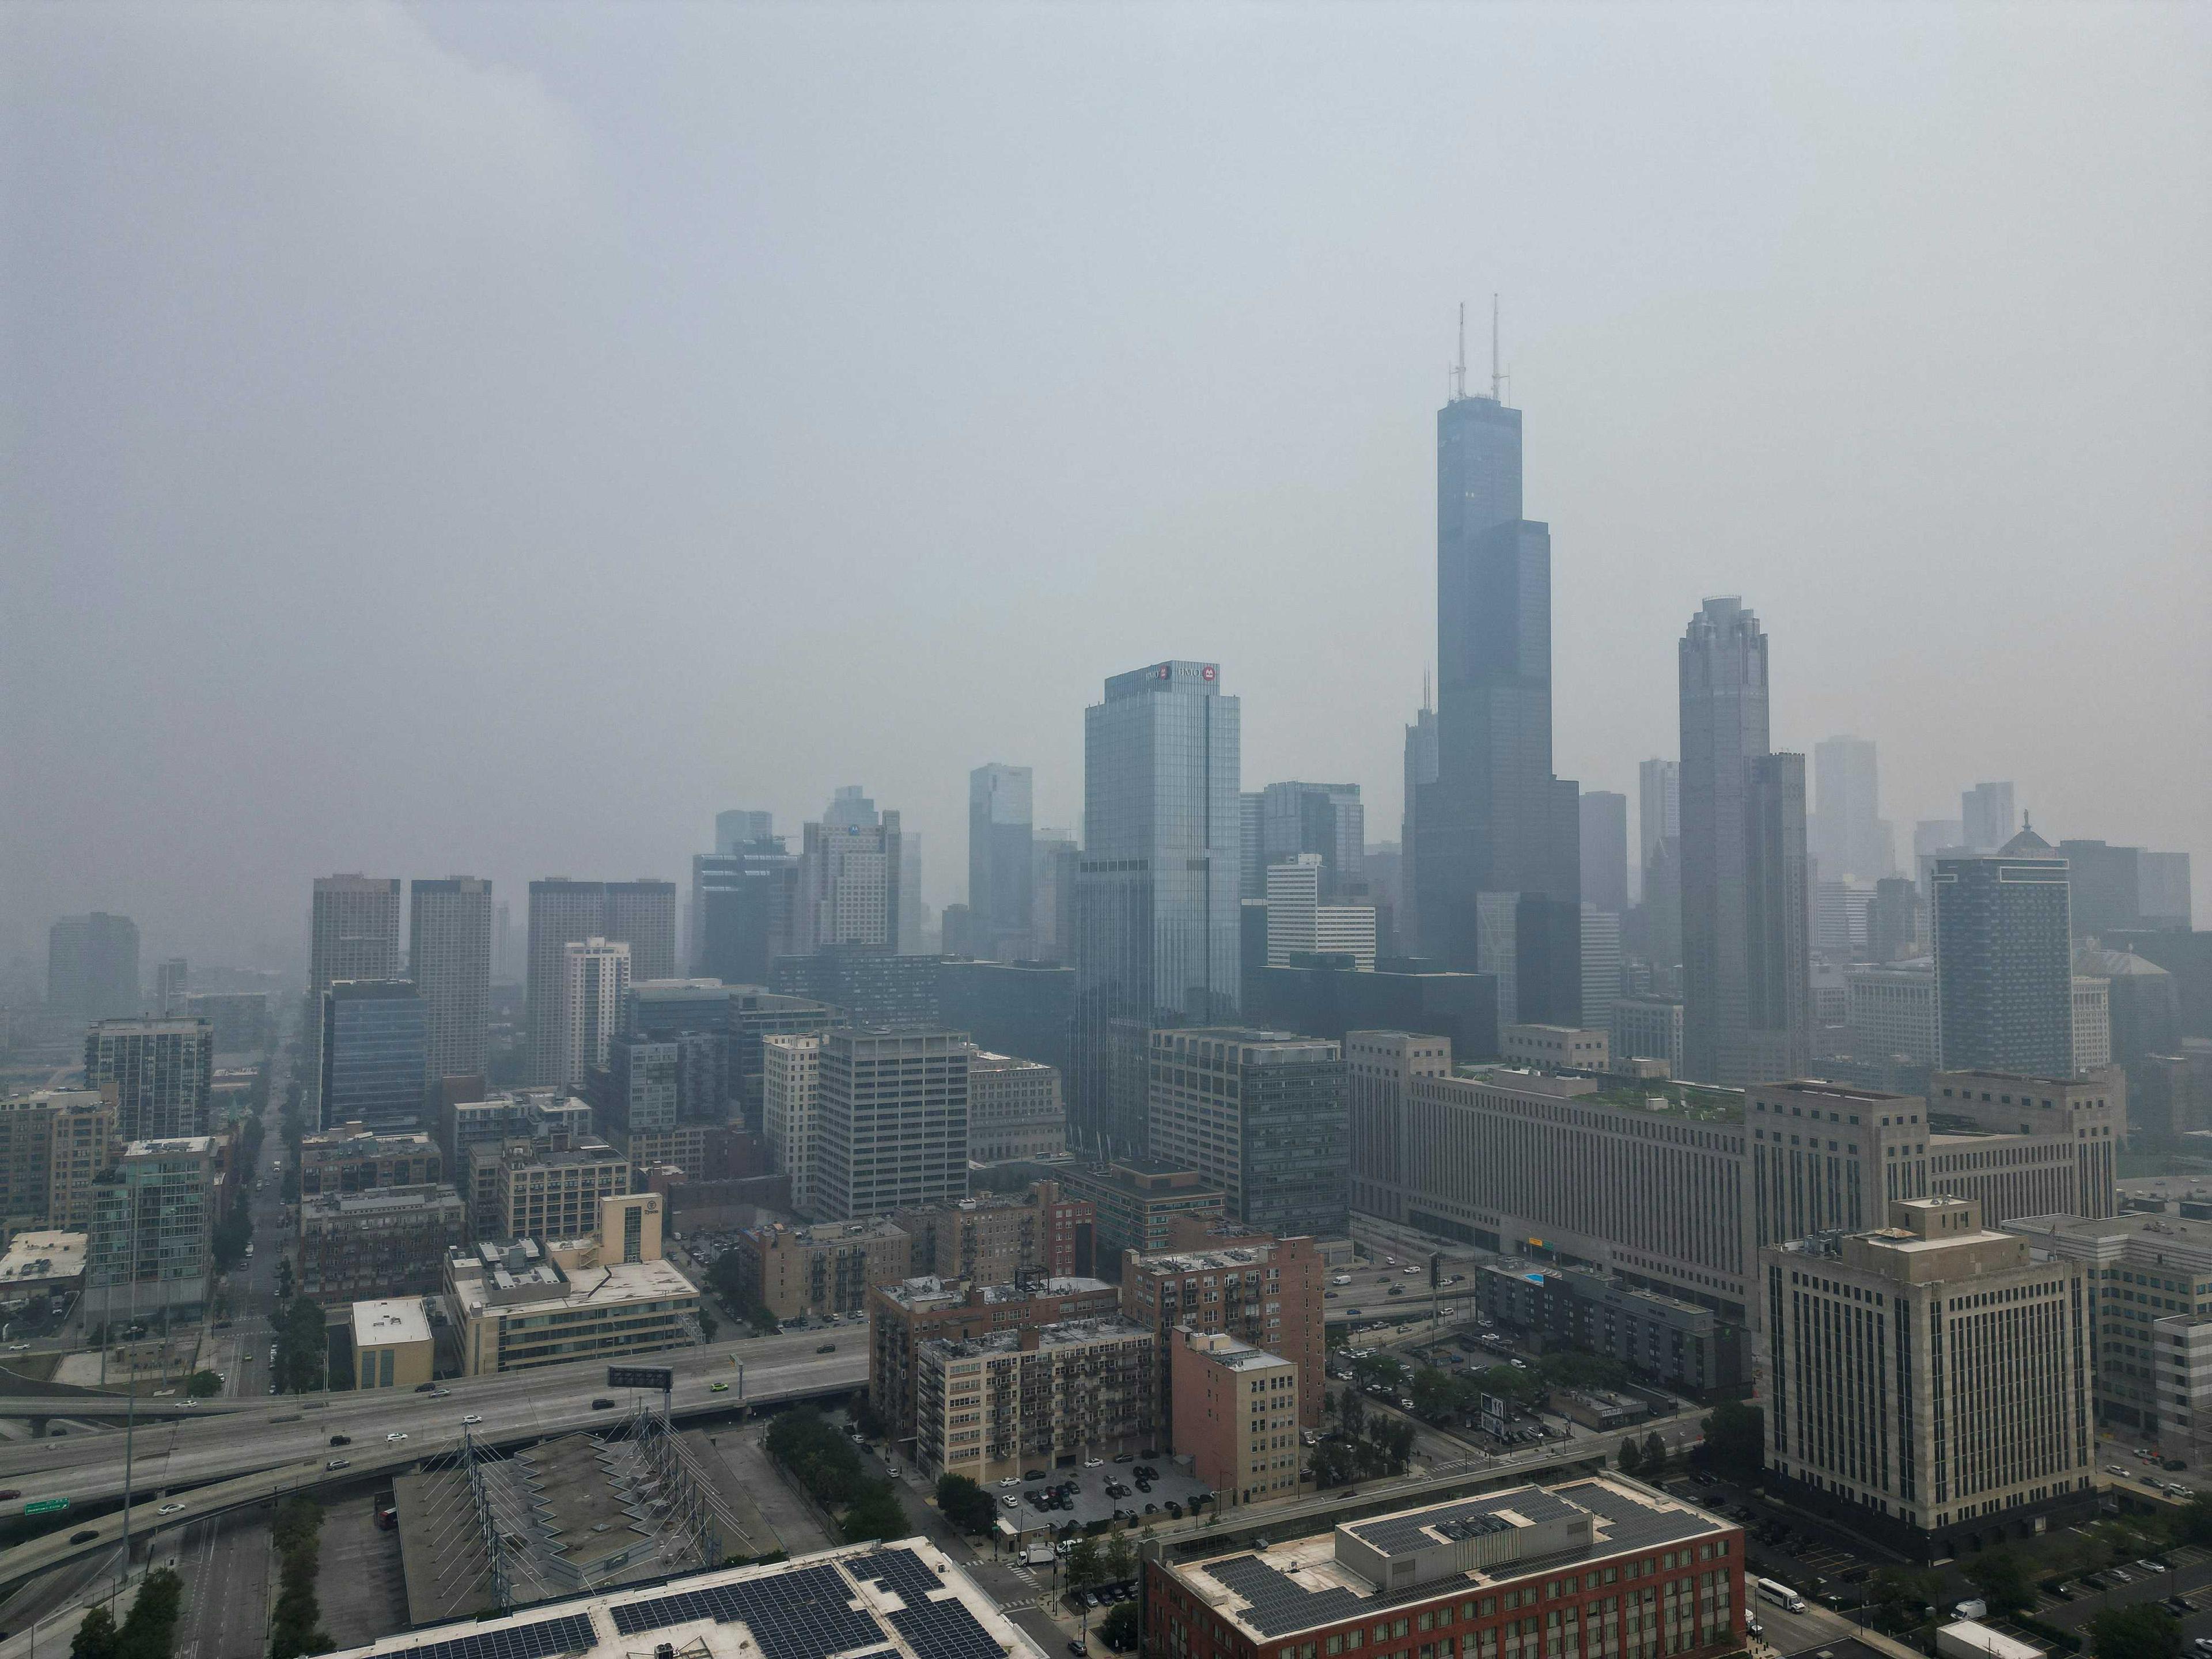 2023-06-27T190936Z_1552326217_RC2NR1AYG18P_RTRMADP_3_CANADA-WILDFIRES-CHICAGO